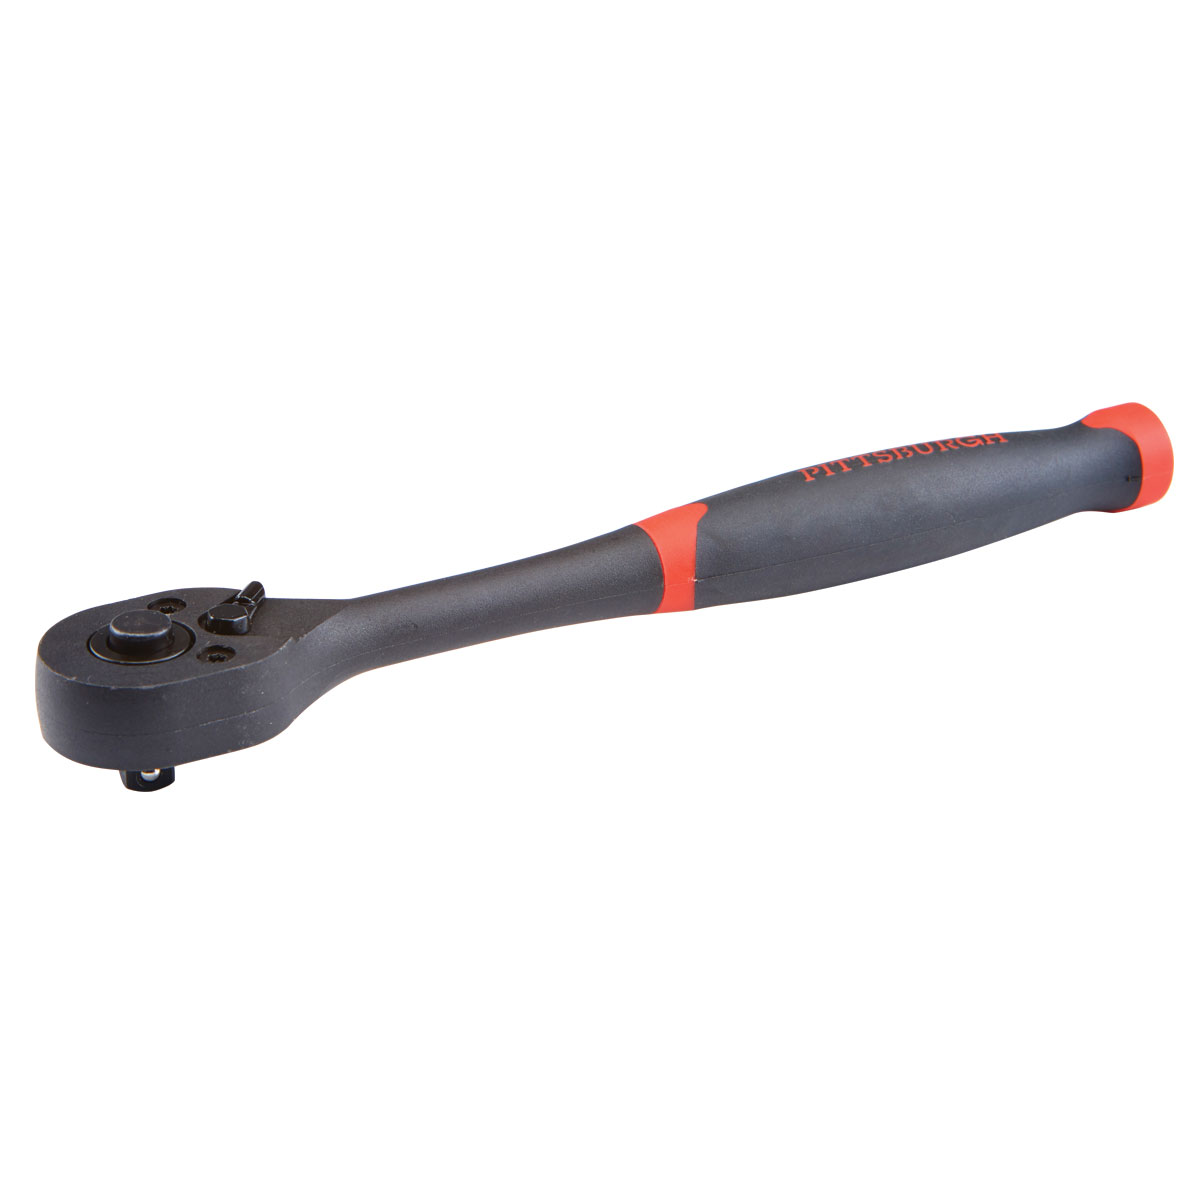 PITTSBURGH 1/4 in. Drive Composite Ratchet - Item 62619